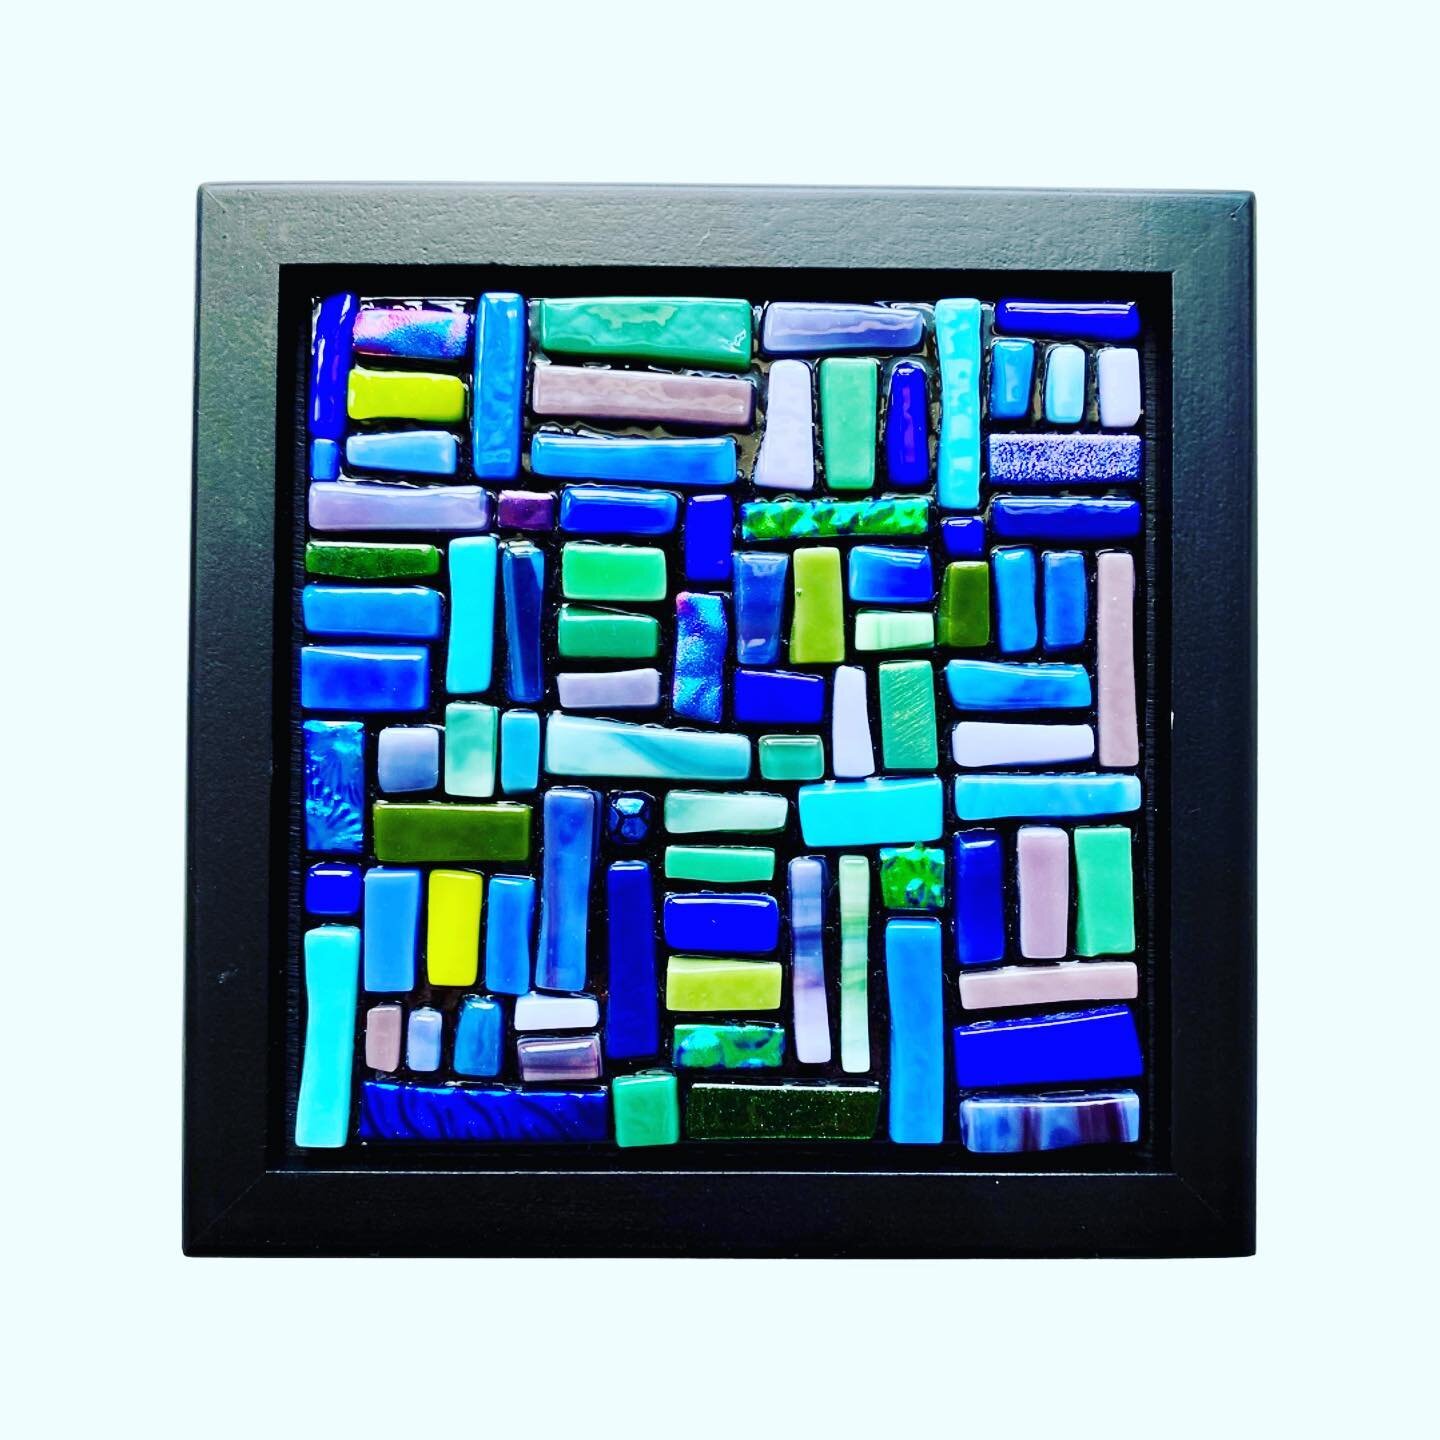 Bitty Mosaic Boxes $48.00 https://etsy.me/1xFnH2o #jewelrybox #stashbox #shopsmall #supportwomenartists #chiglasscollective #mothersdaygift #unique #bullseyglass